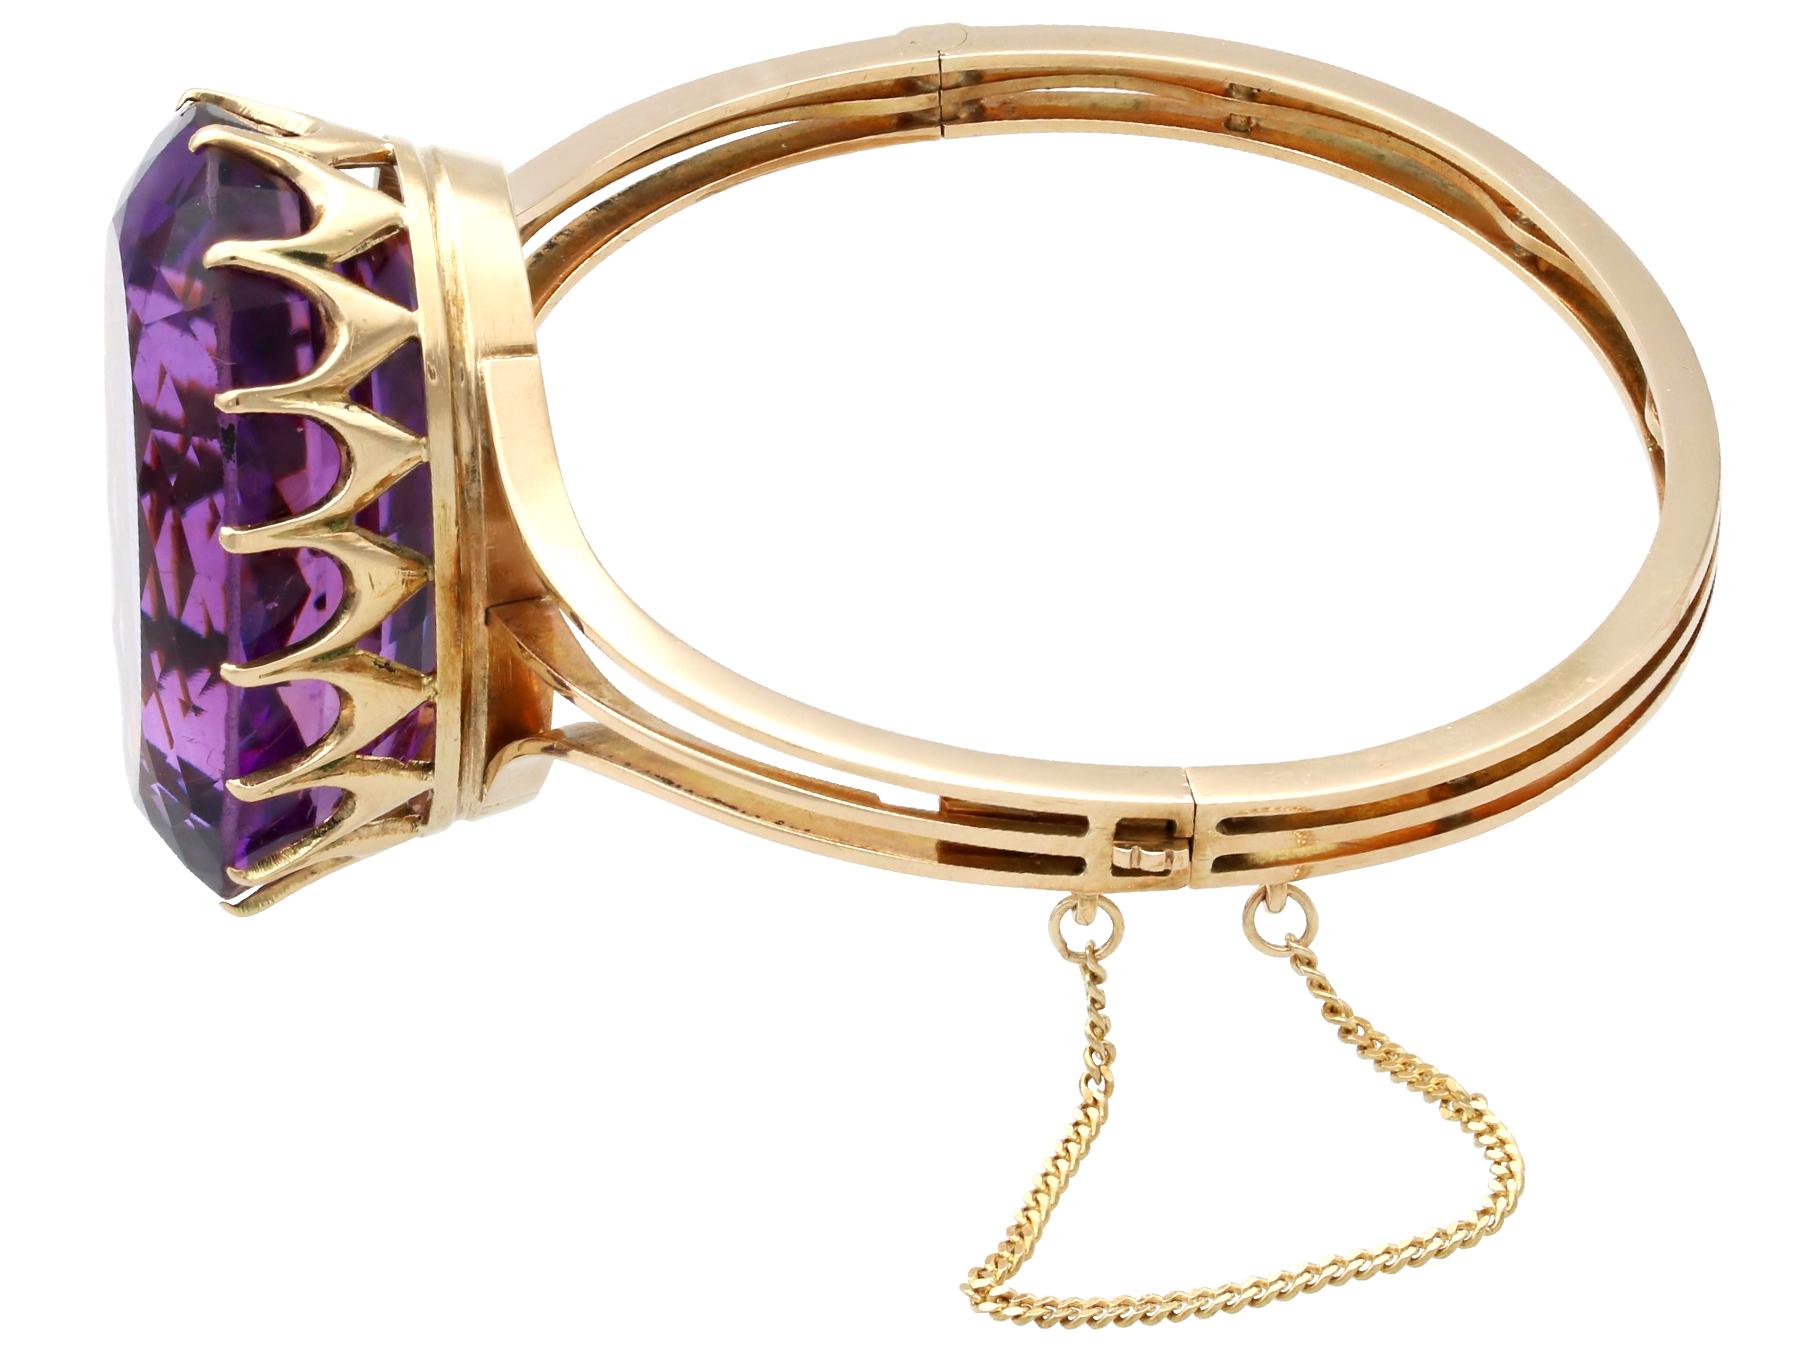 Antique 70.65ct Amethyst and 14k Yellow Gold Bangle In Excellent Condition For Sale In Jesmond, Newcastle Upon Tyne